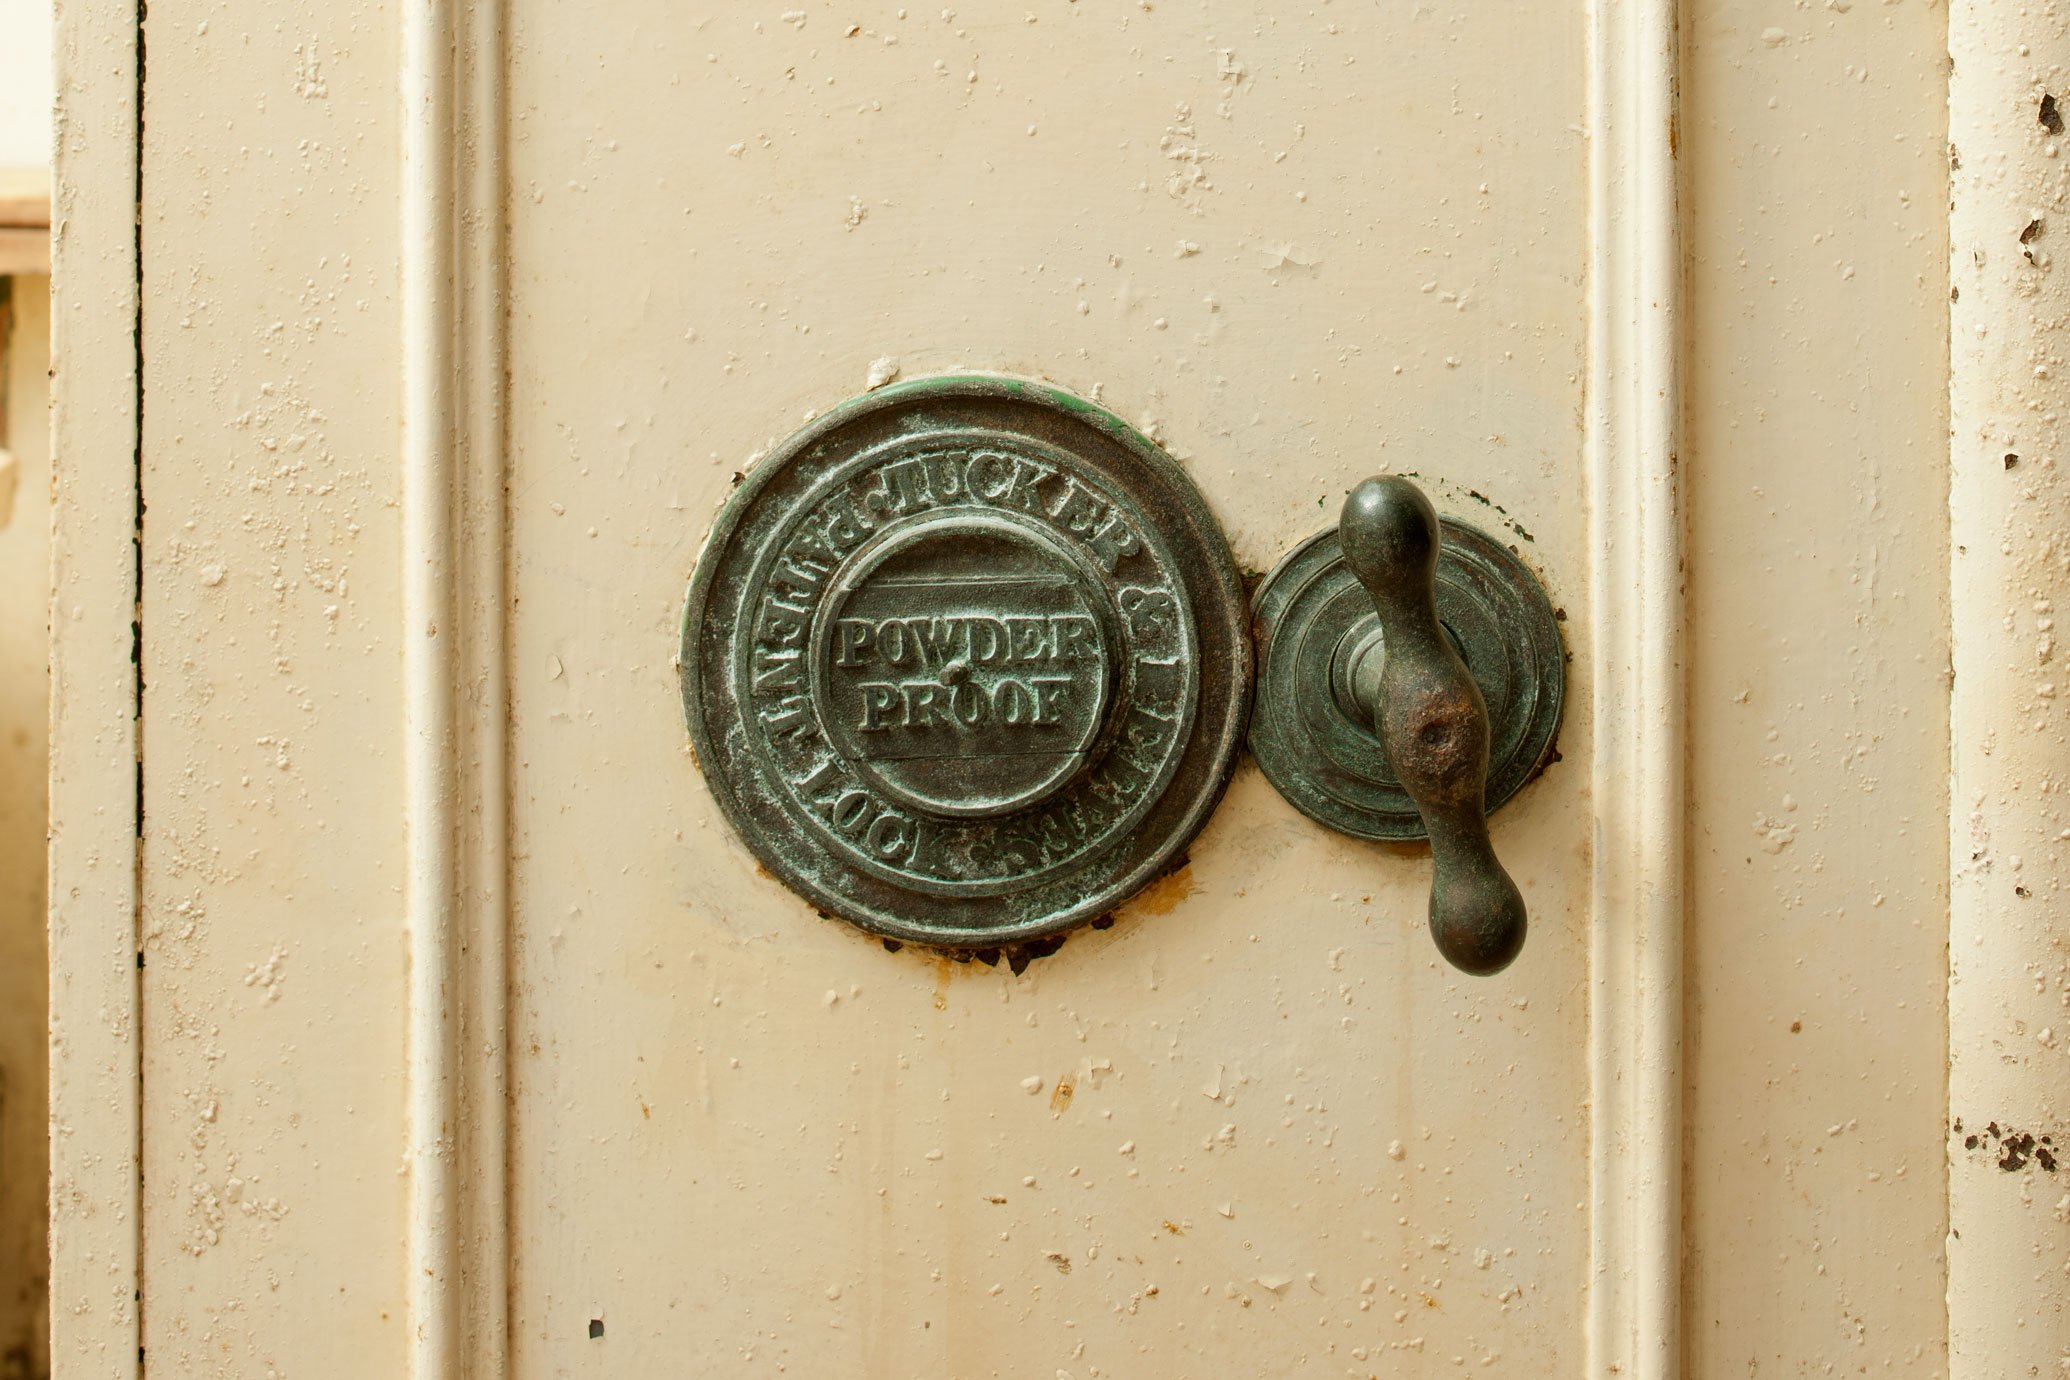 A close up detail of a lock fitting inscribed 'Tucker & Reeves patent lock- powder proof'.